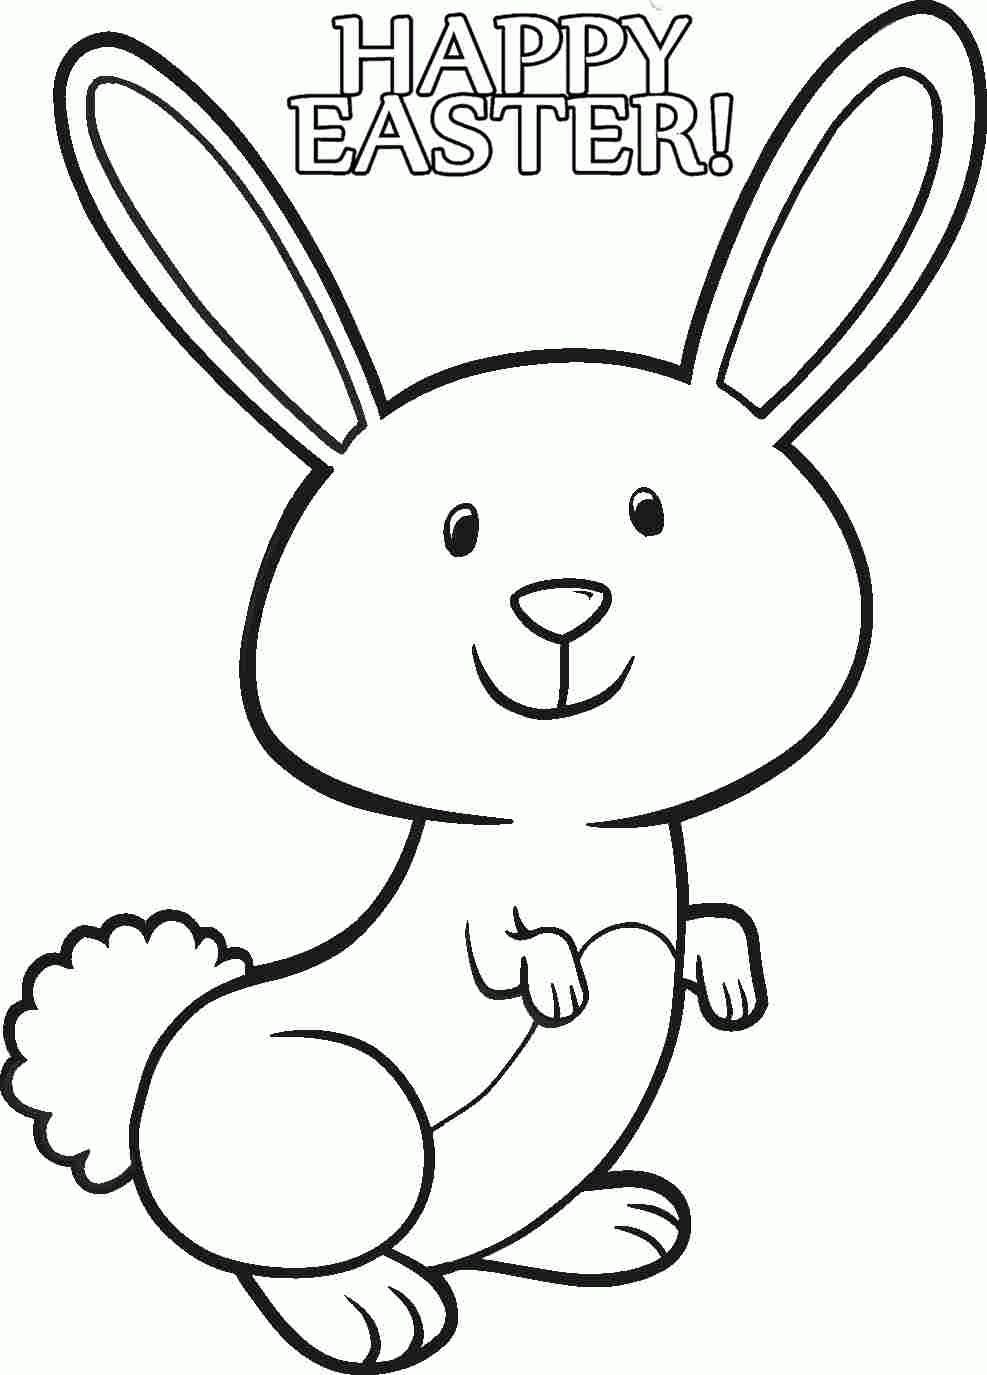 Bunny Coloring Page | Coloring Pages for Kids and for Adults